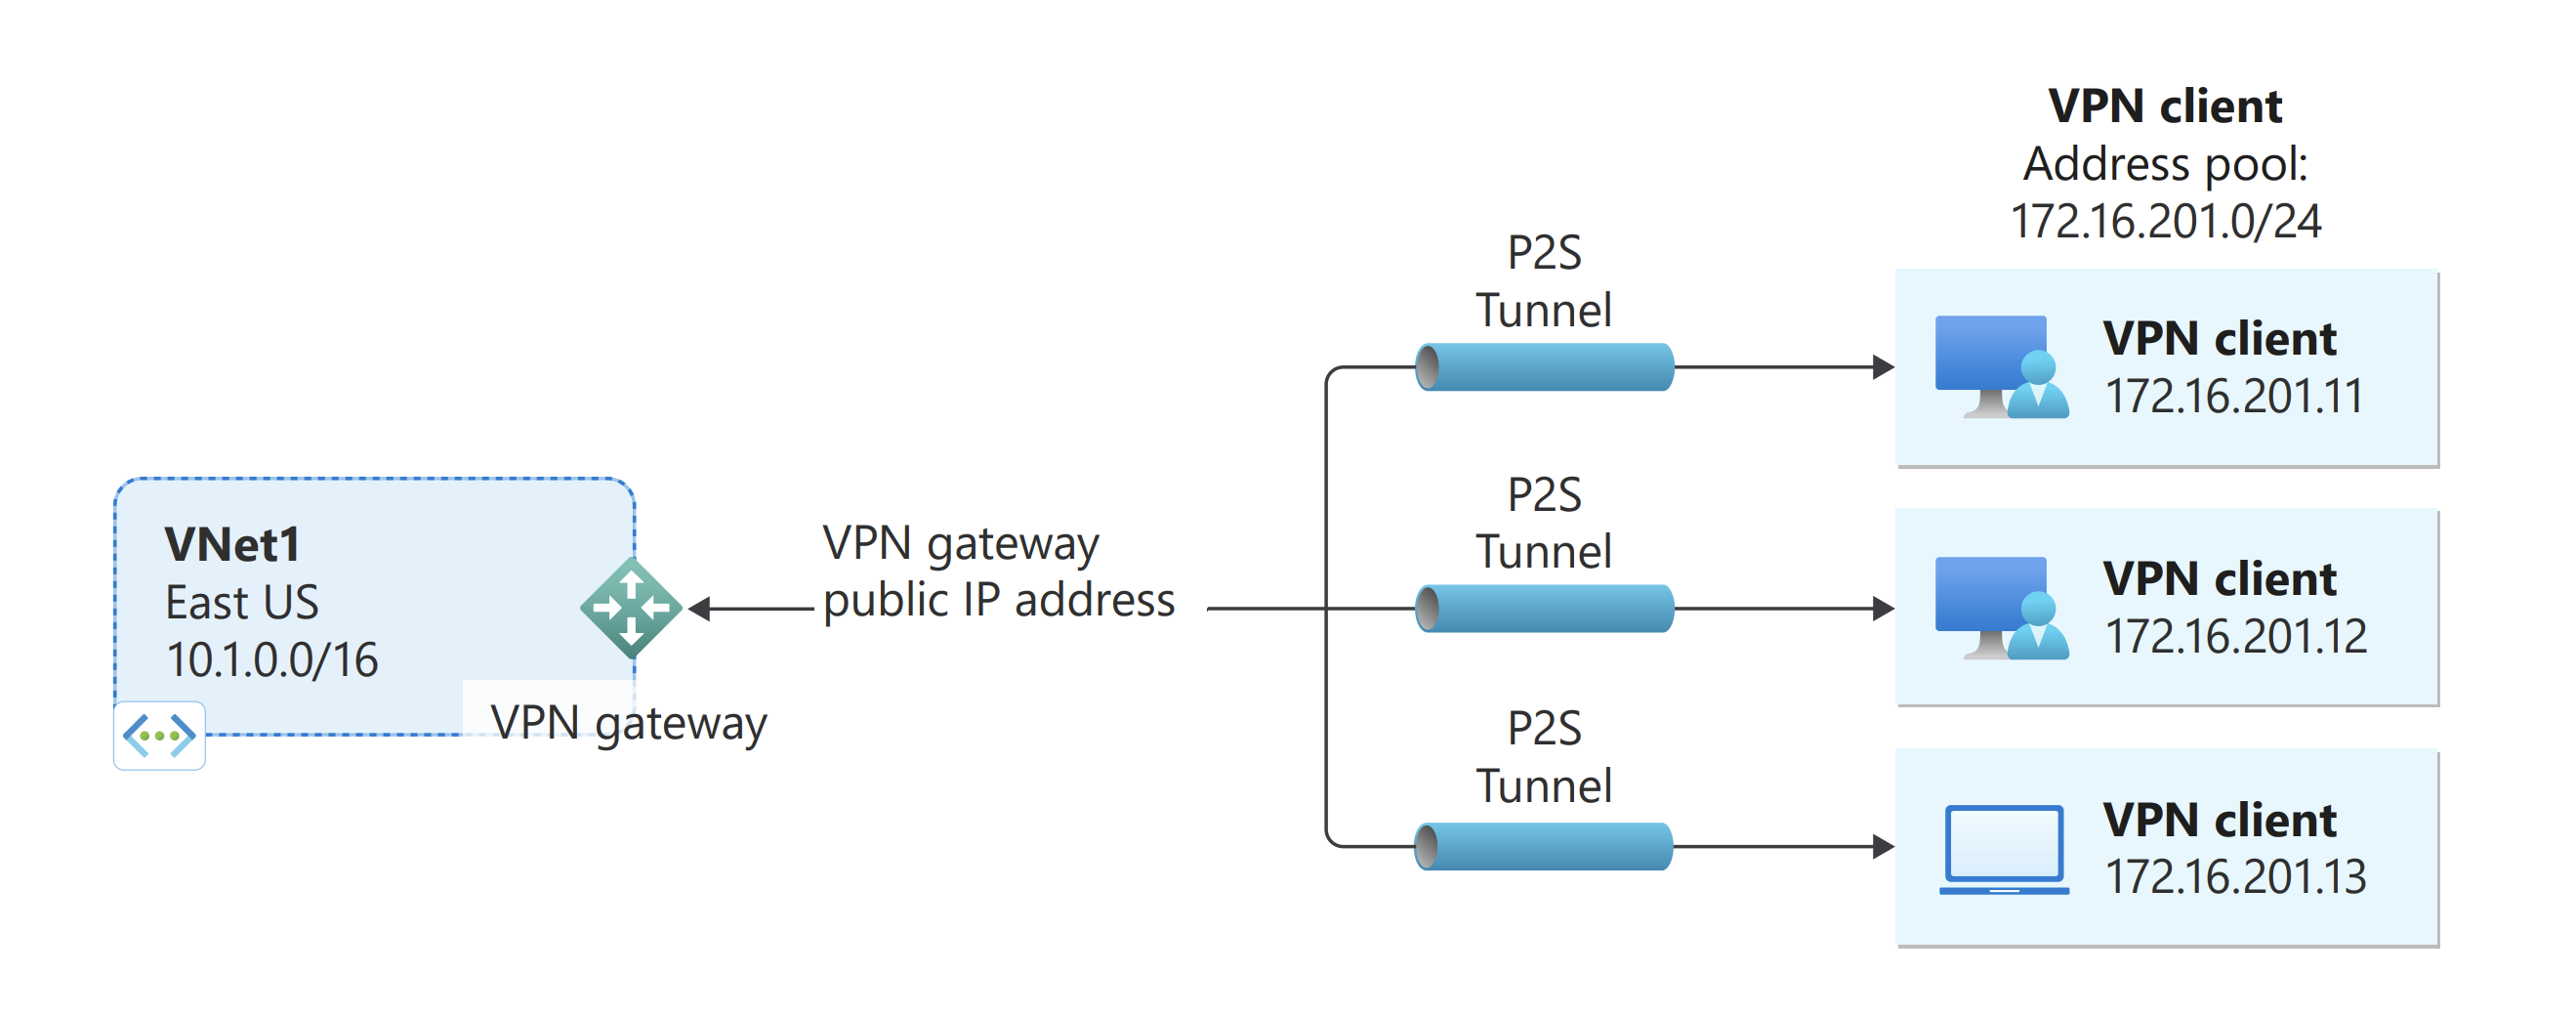 Consider using a different VPN server
Reset your network settings